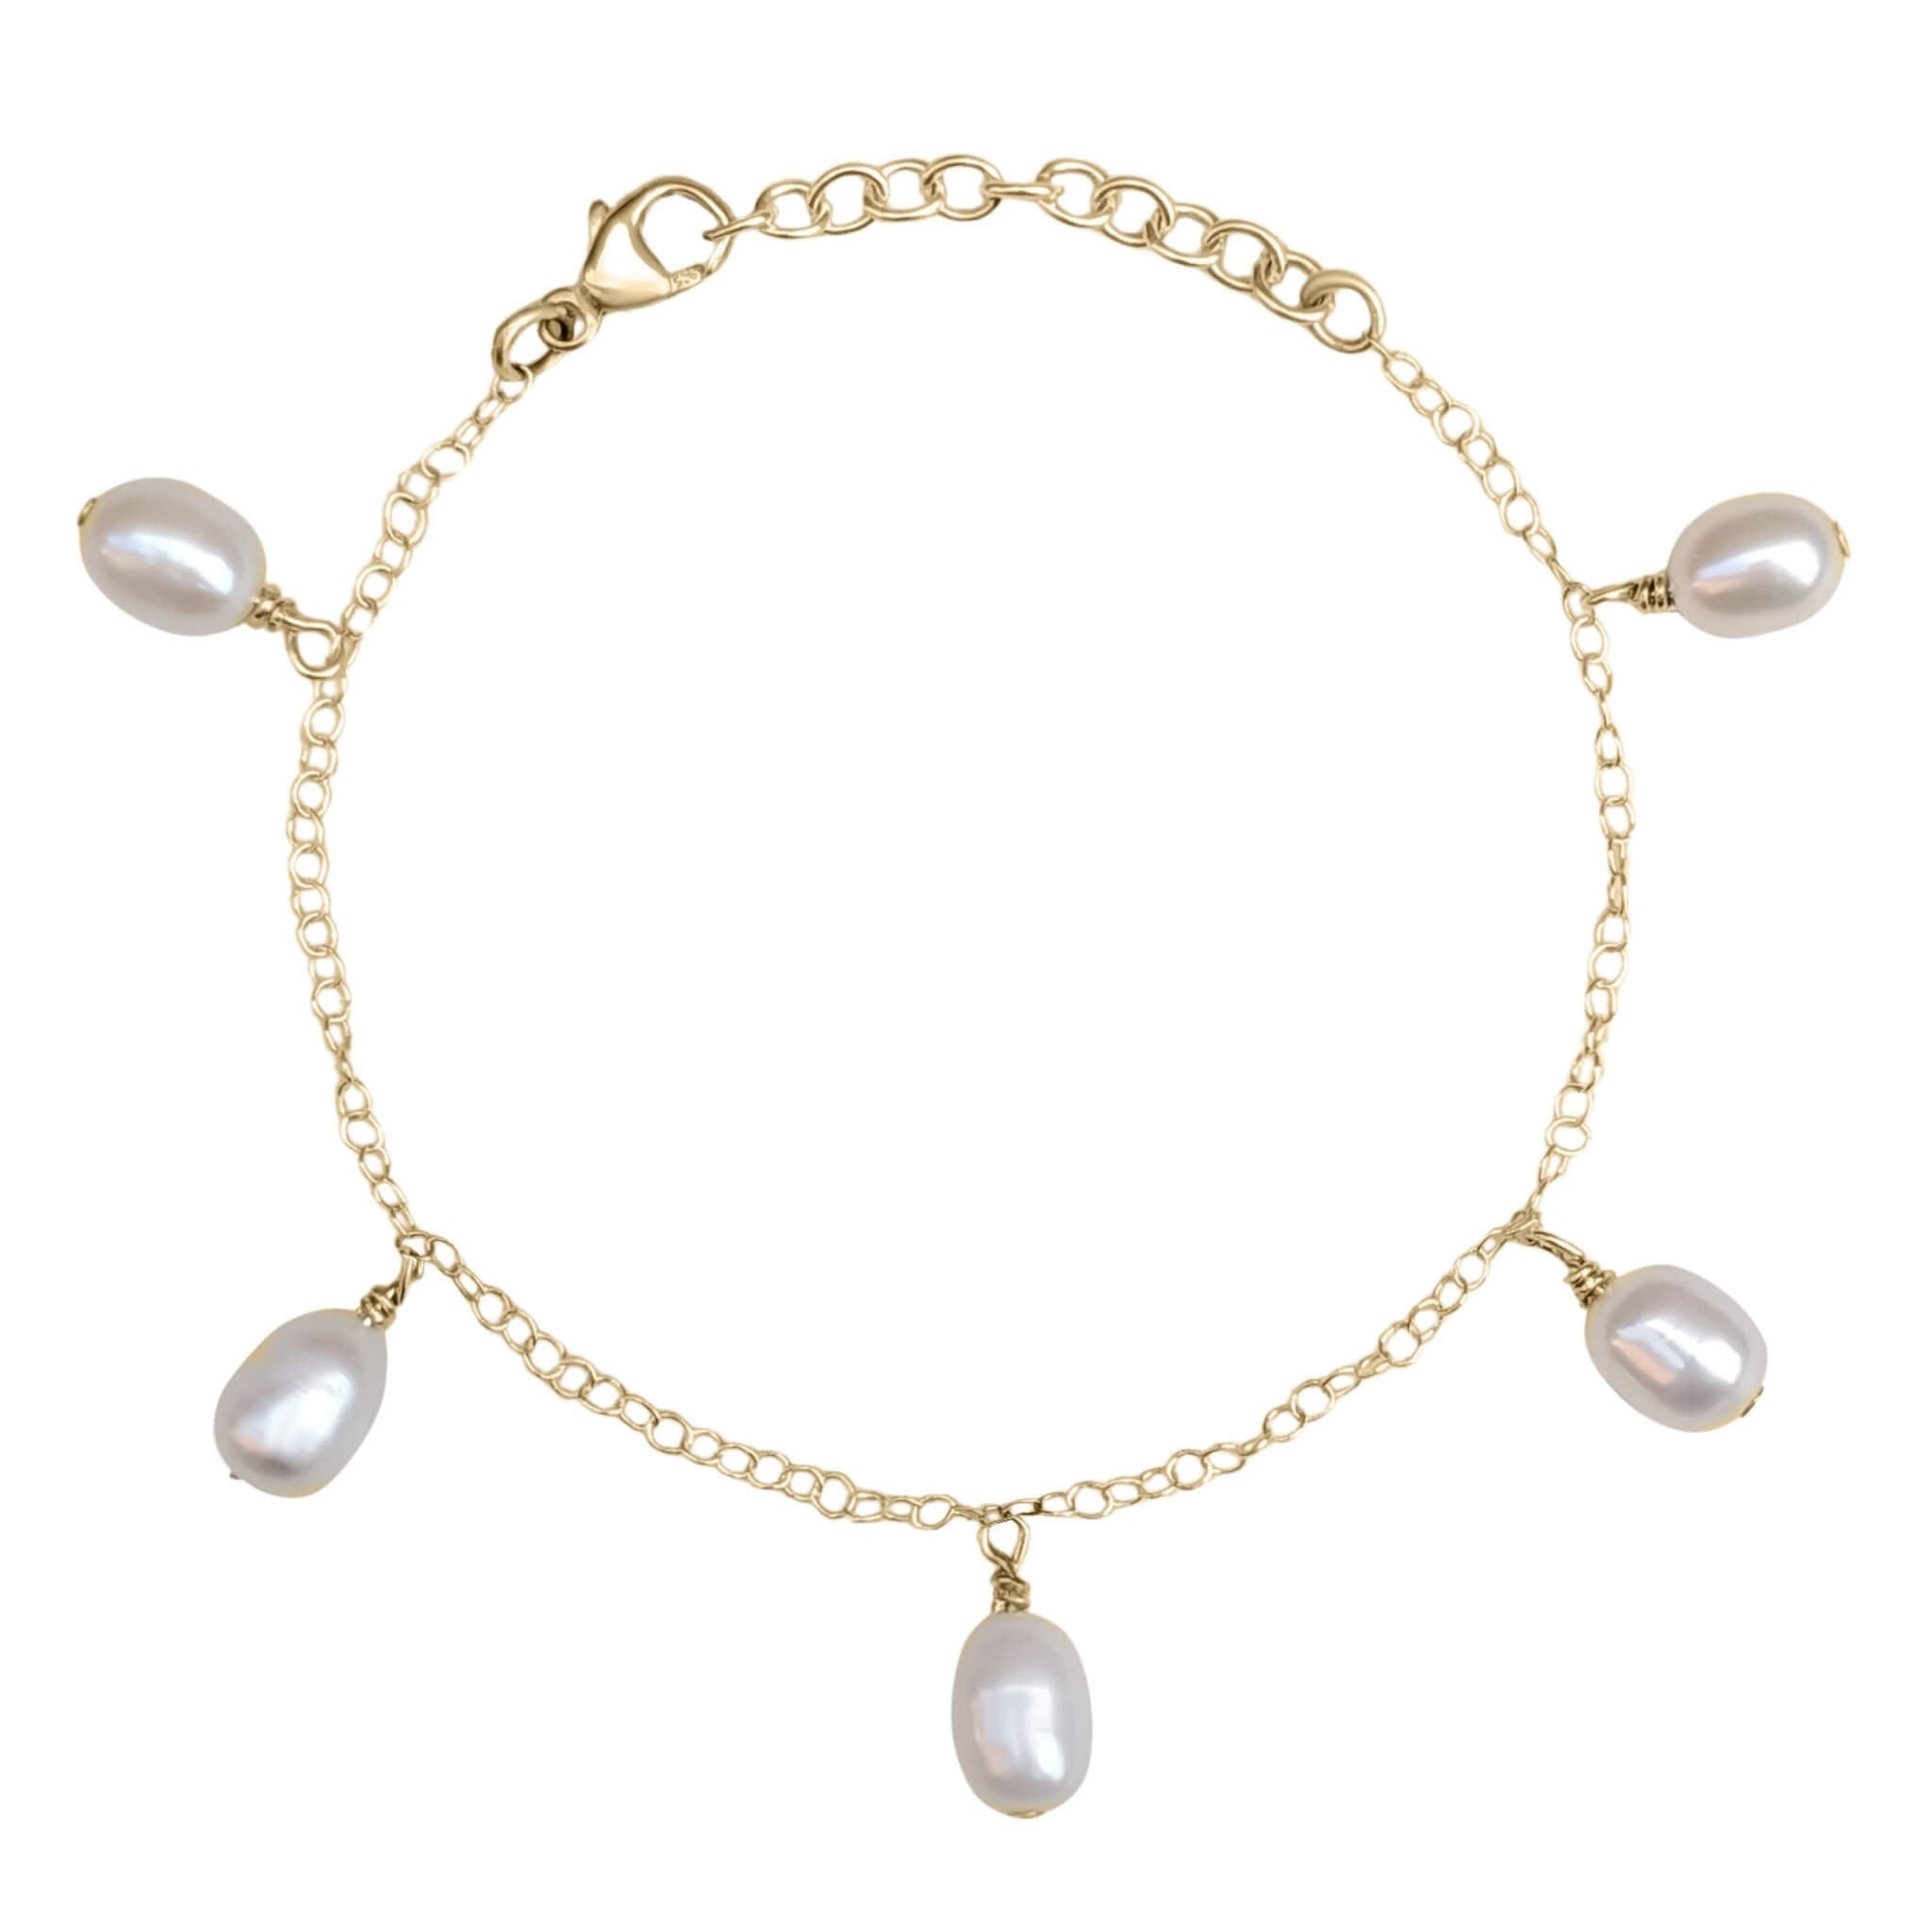 pearl drop charm bracelet in gold filled on white background